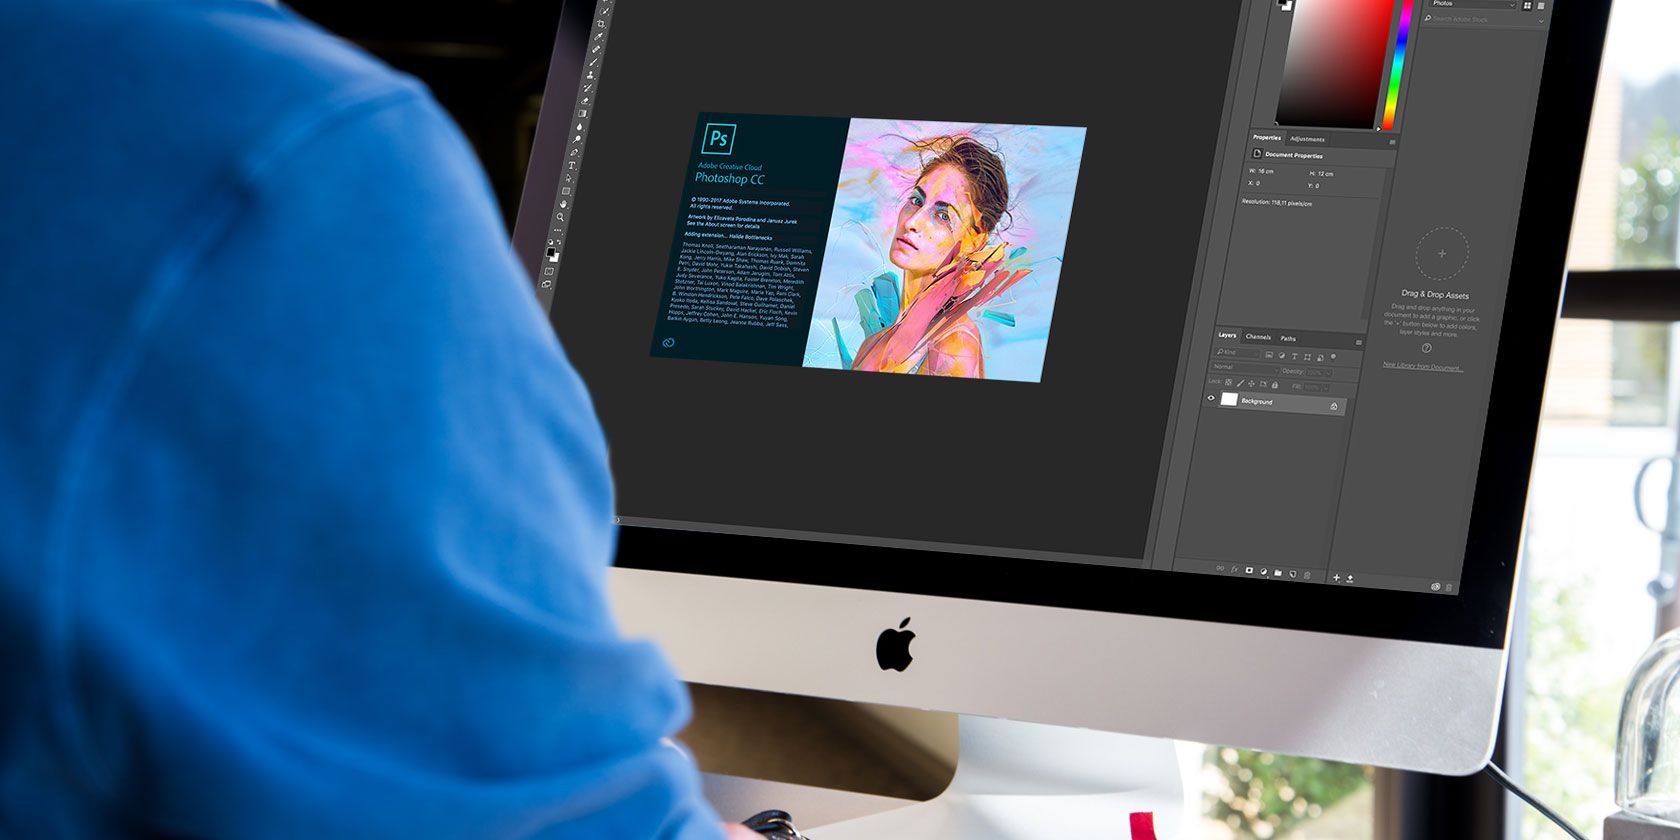 adobe photoshop cc 2018 actions free download